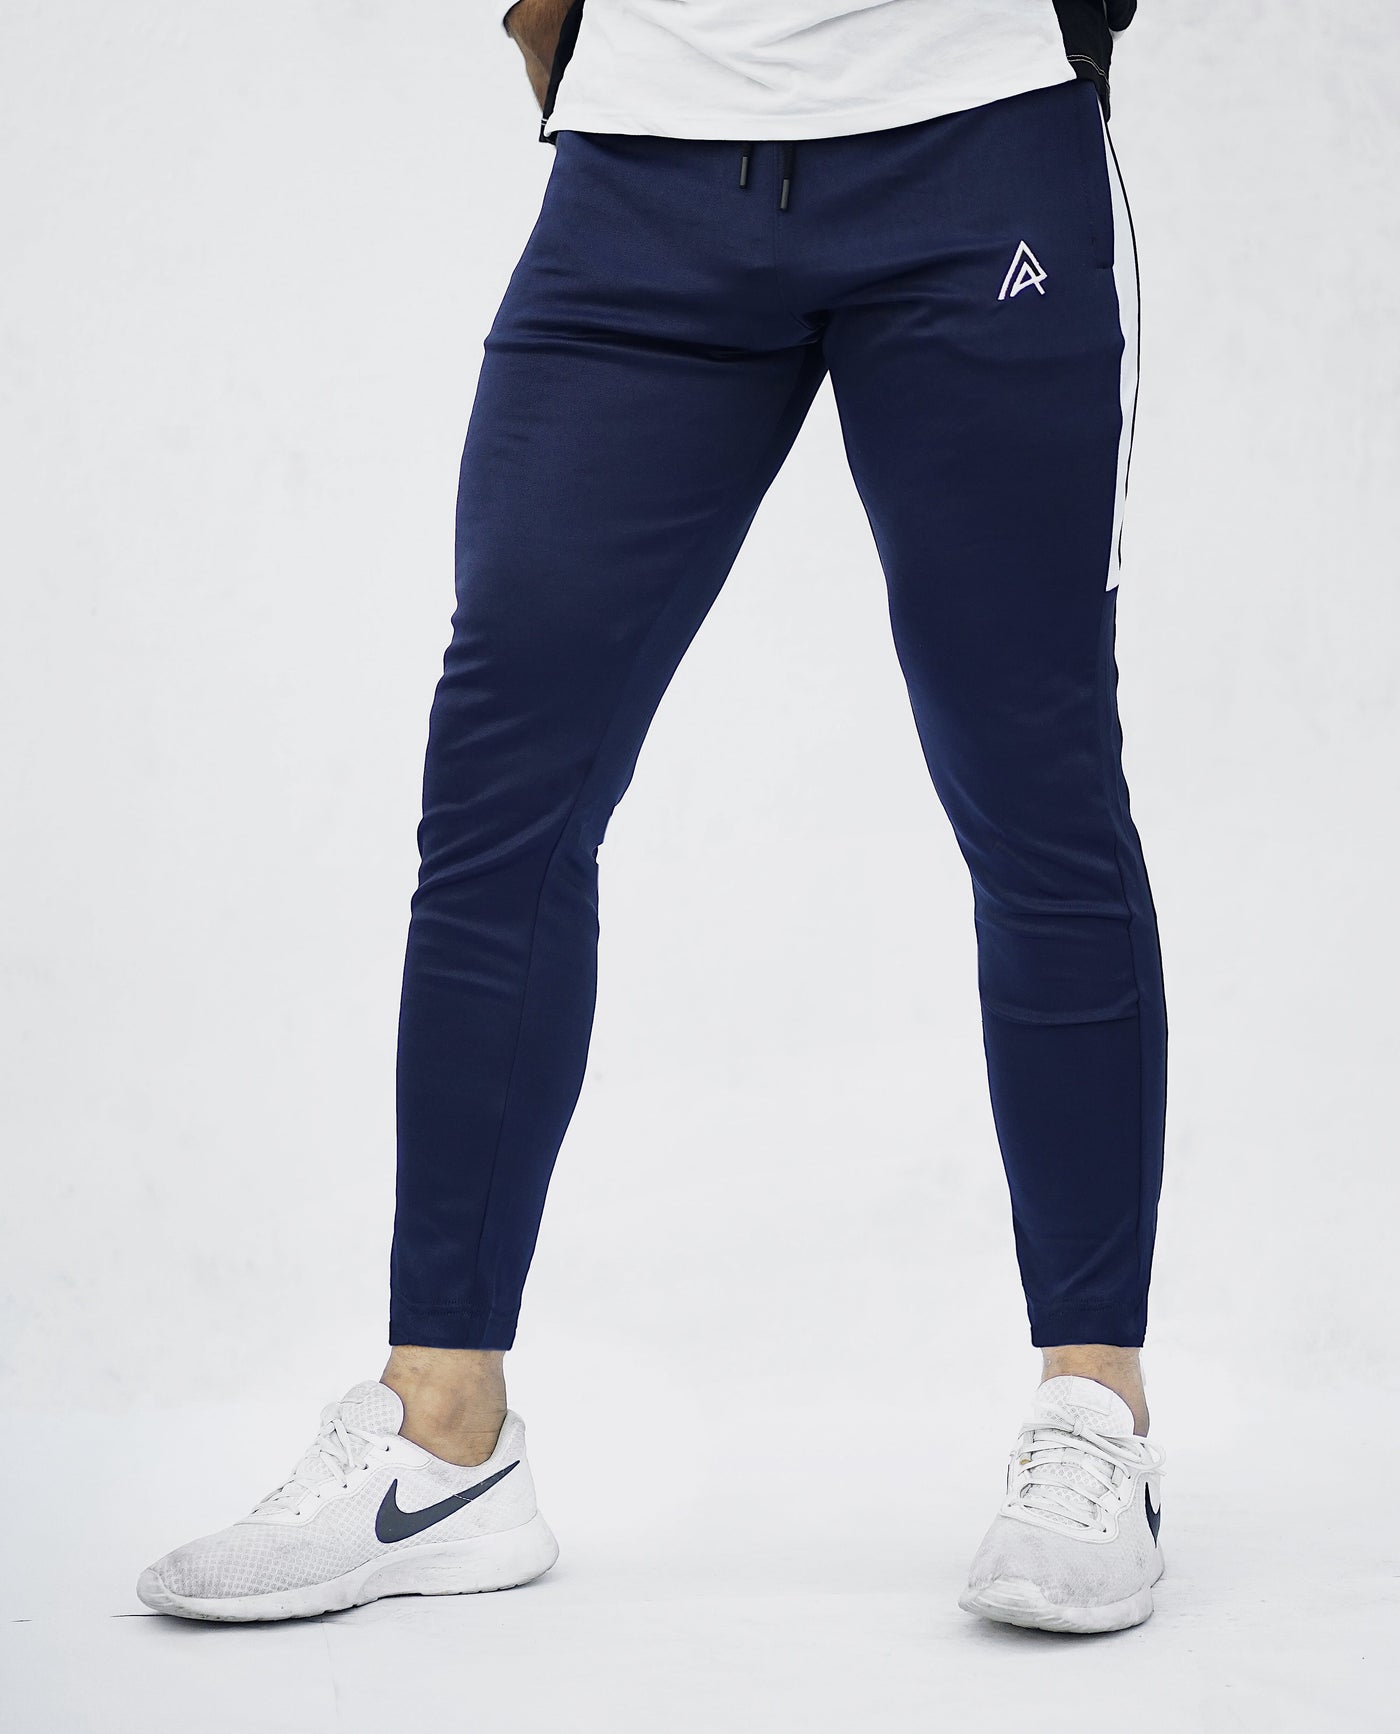 Deep navy with White Side Panel Quick Dry Bottoms